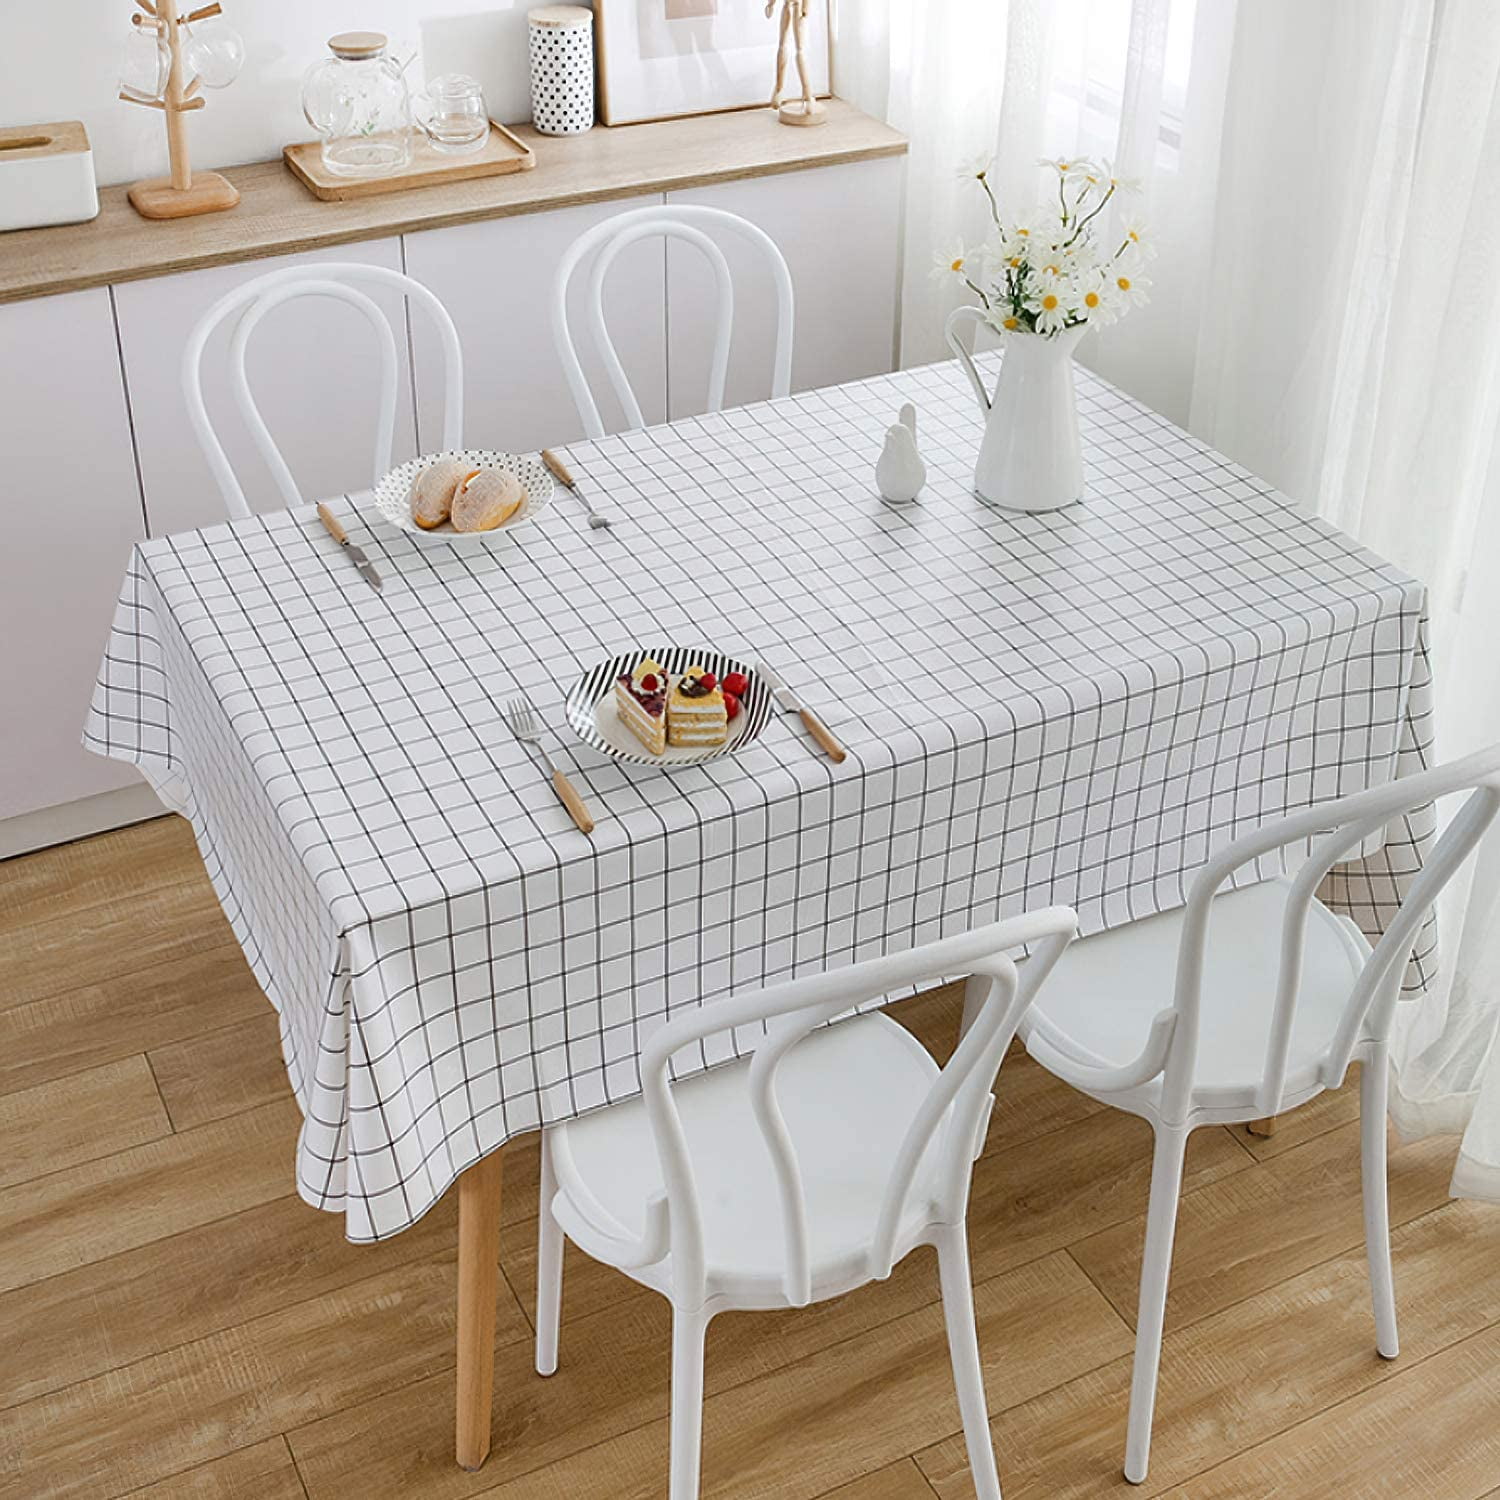 2 Pack Waterproof Tablecloth,Oilproof, Wipeable,Stain-Resistant PVC ...